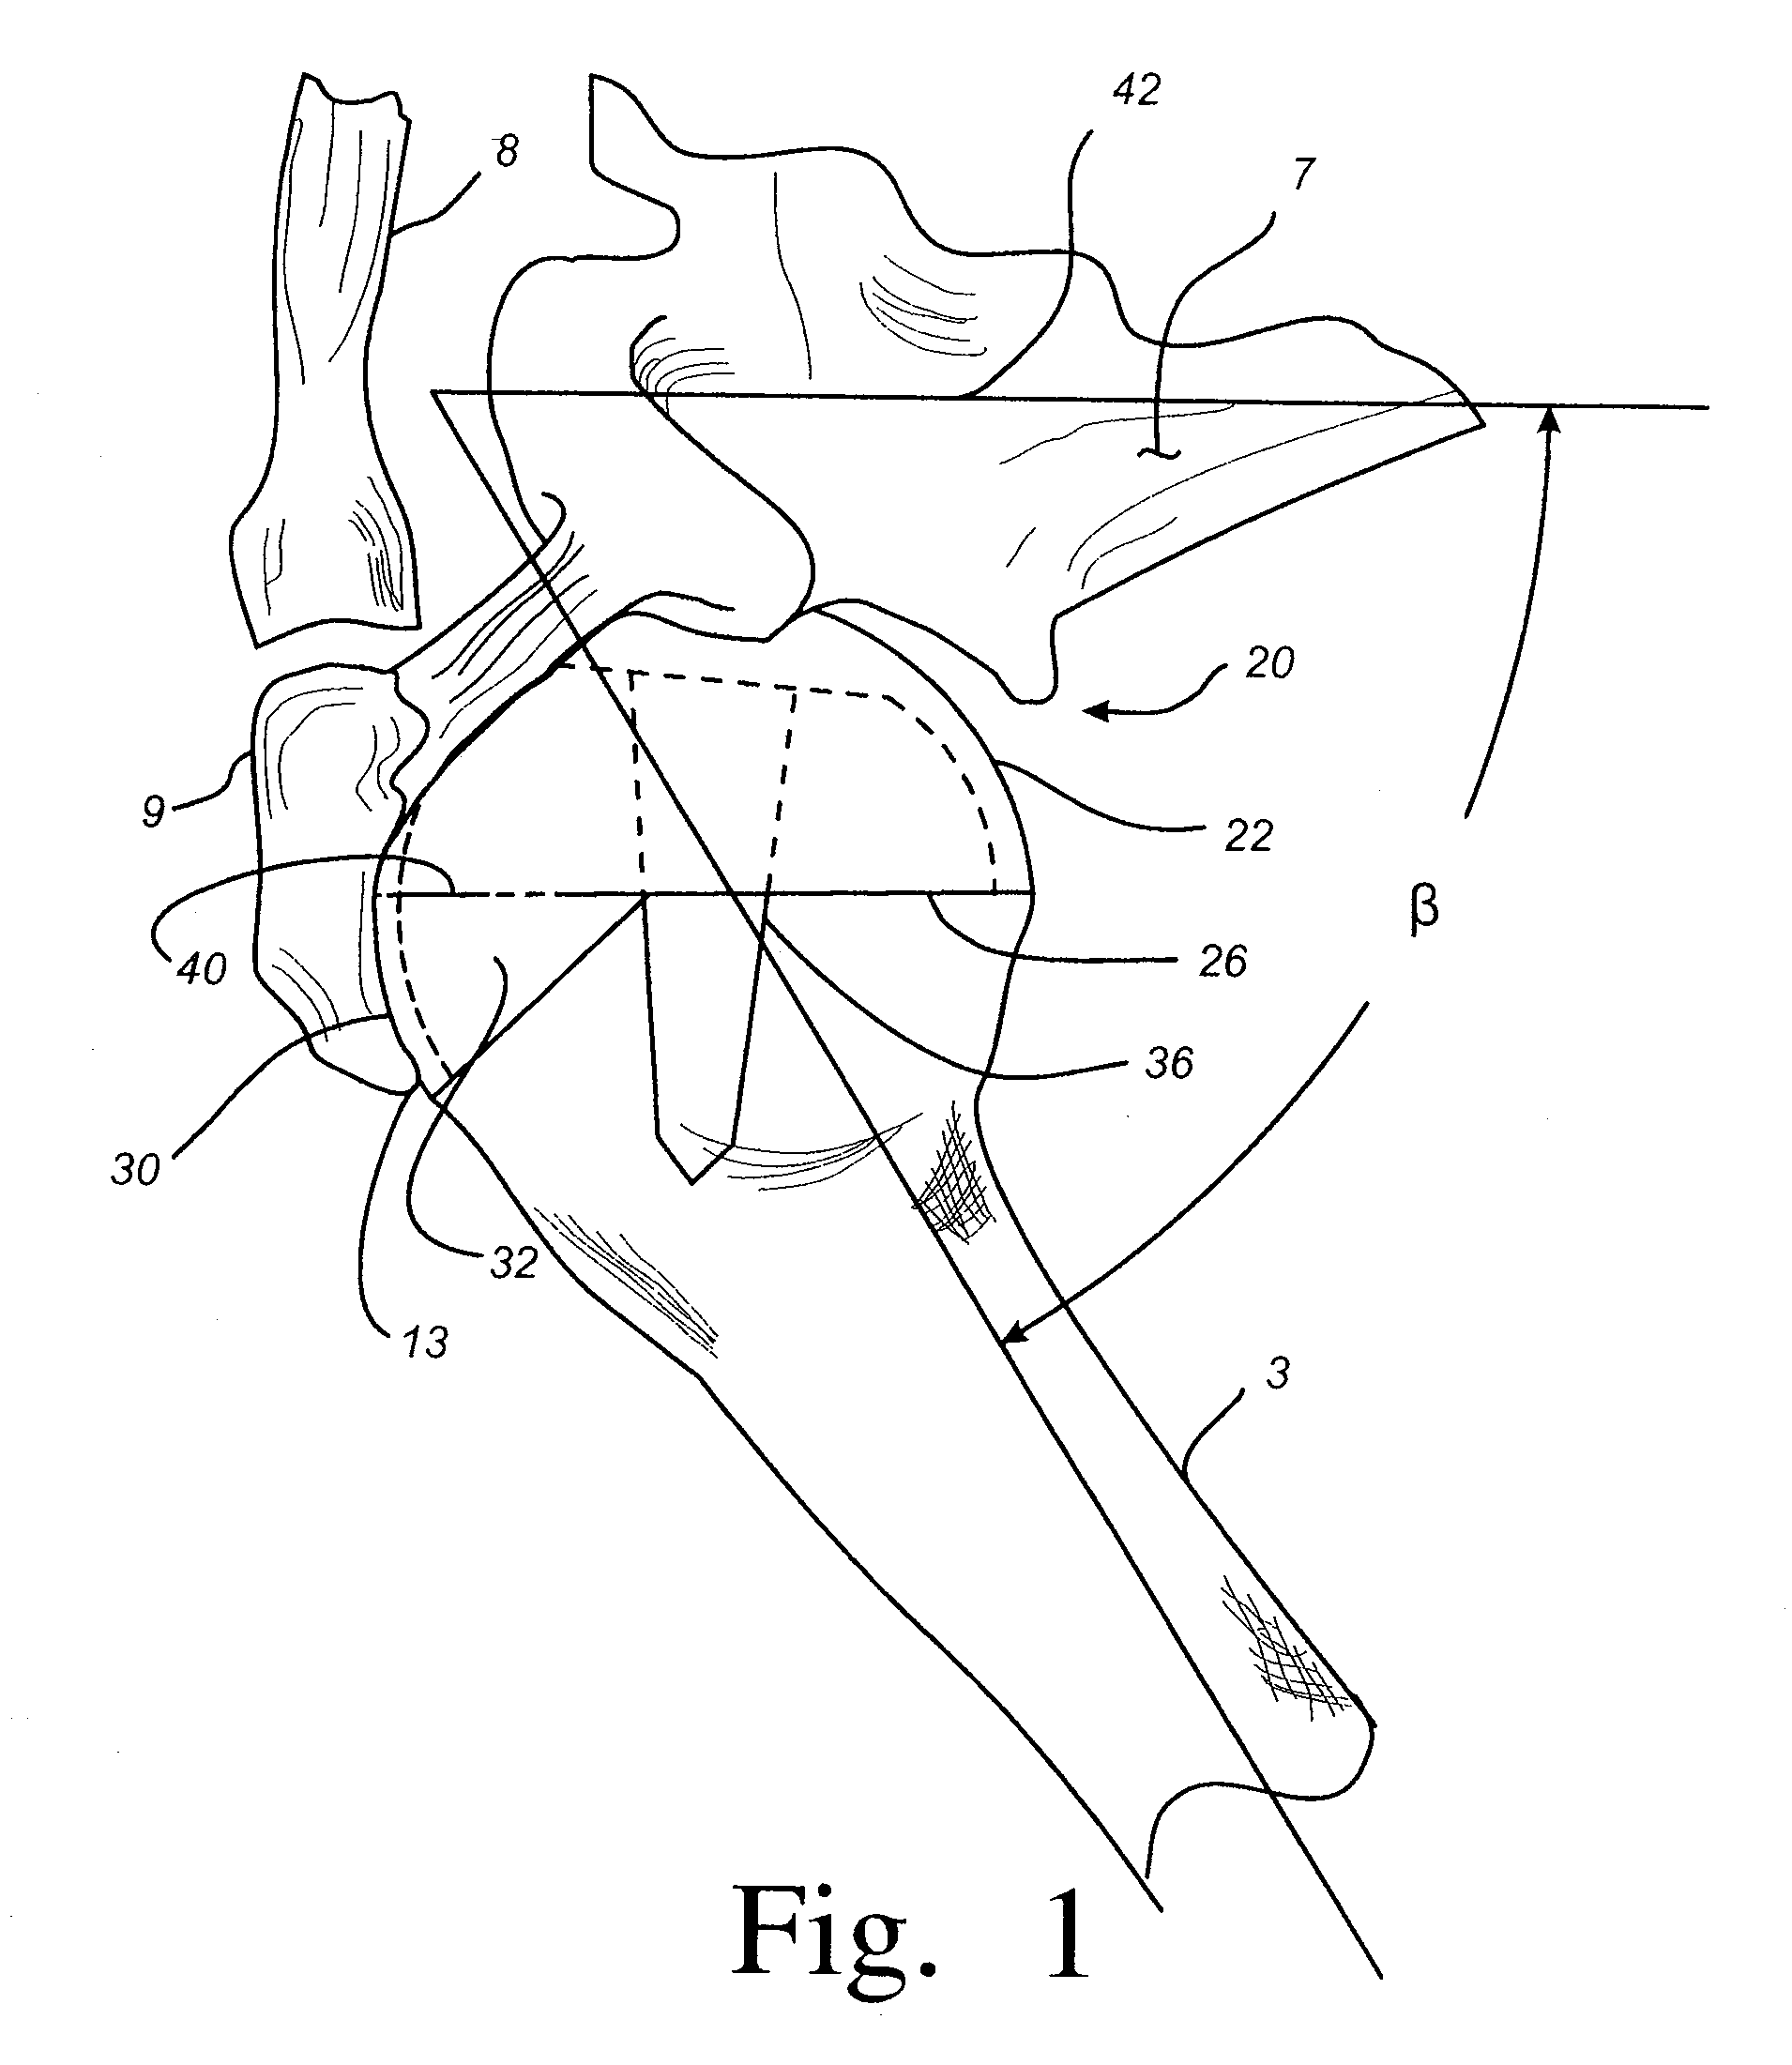 Cutting guide for use with an extended articulation orthopaedic implant